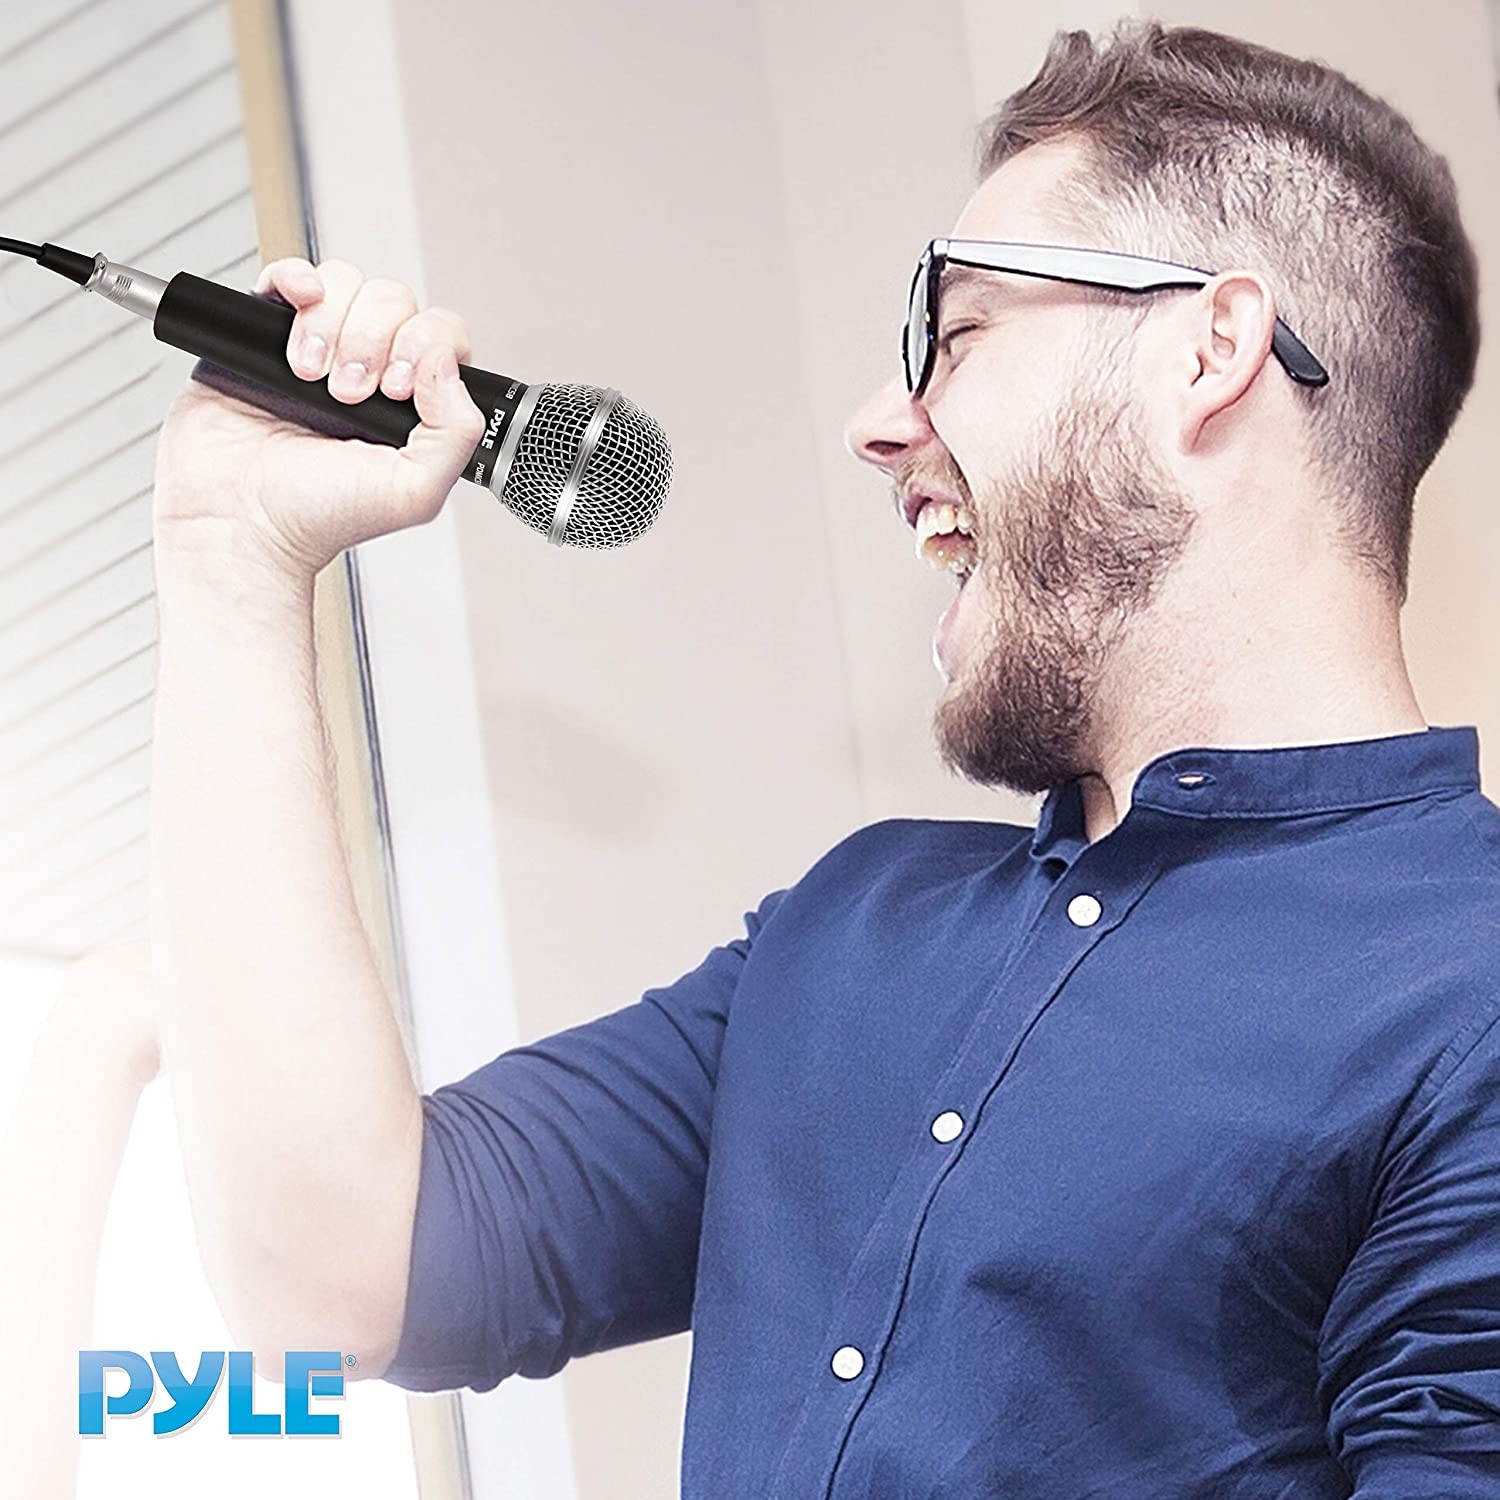 Pyle LM-583 Microphone Professionnel